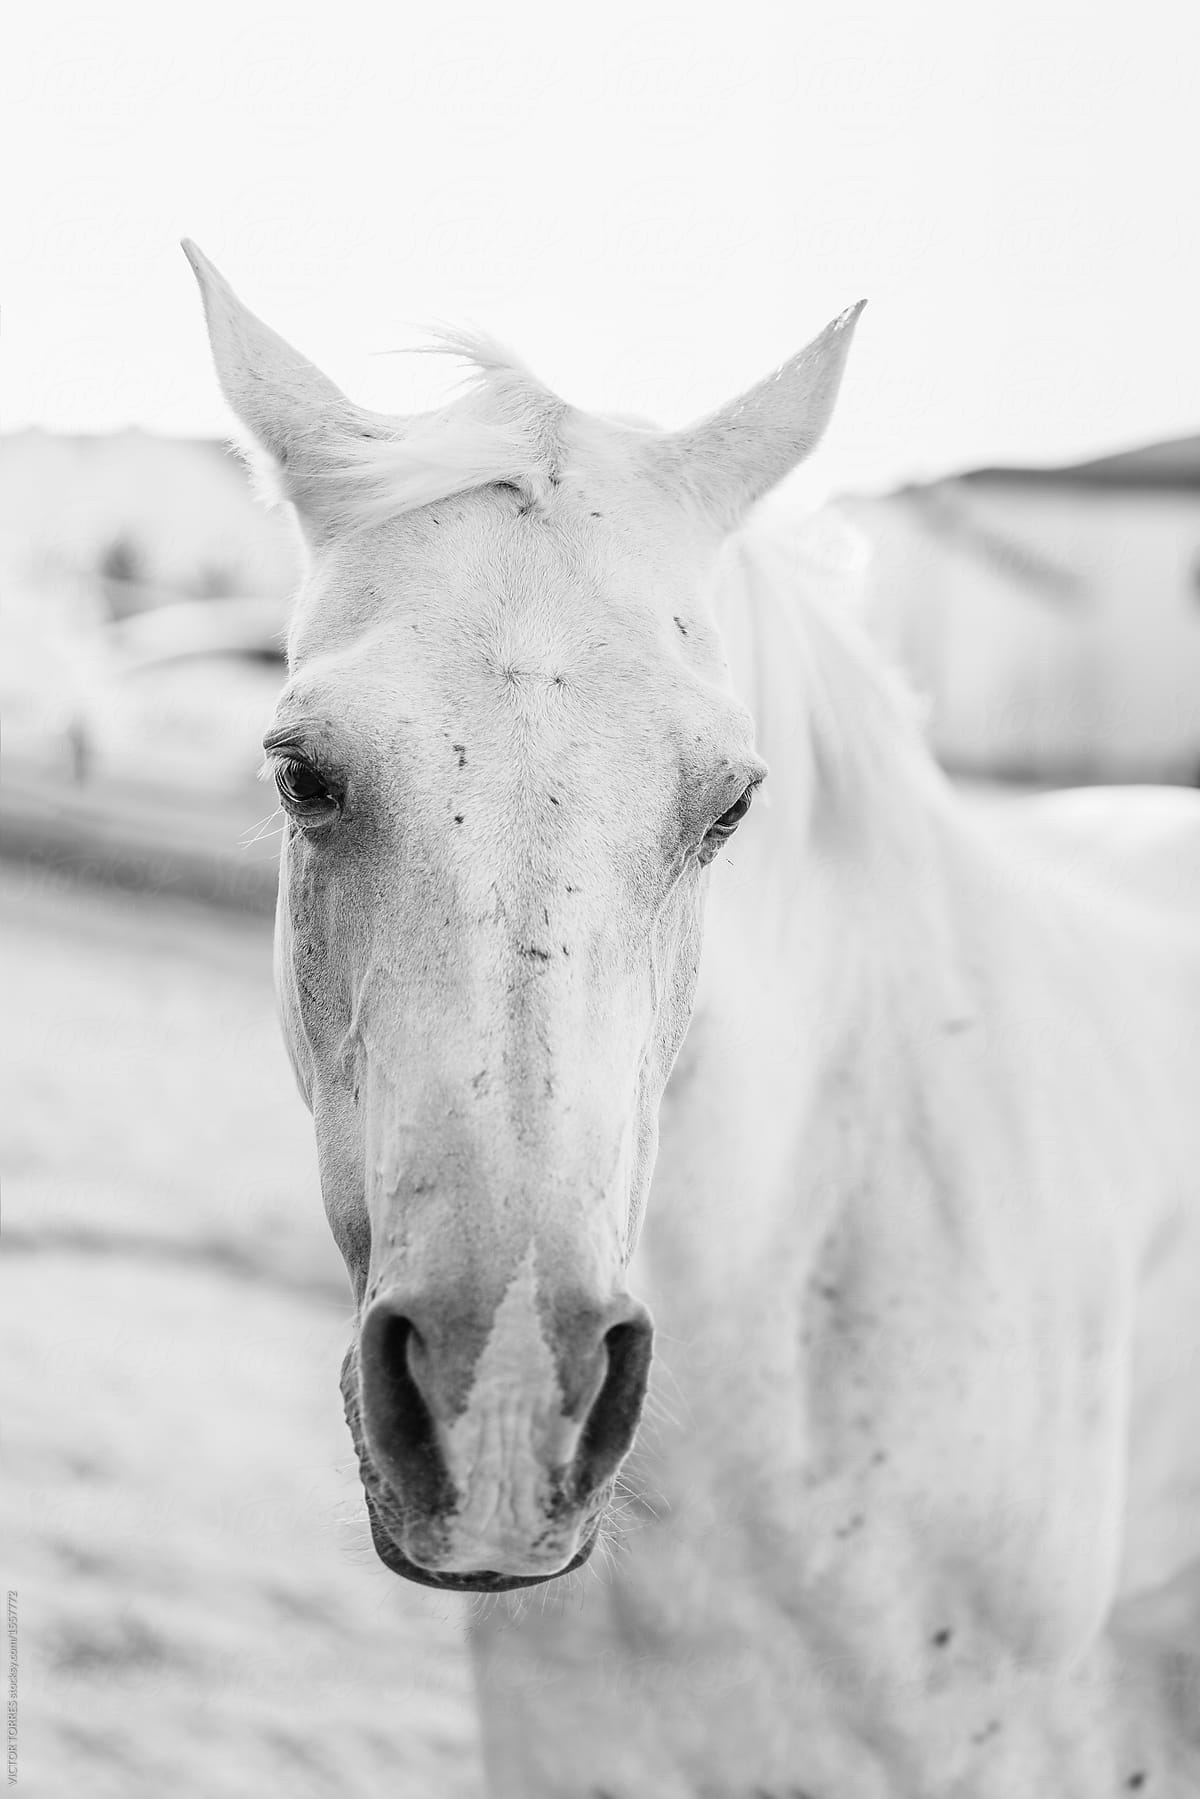 Old white horse with scars on its face